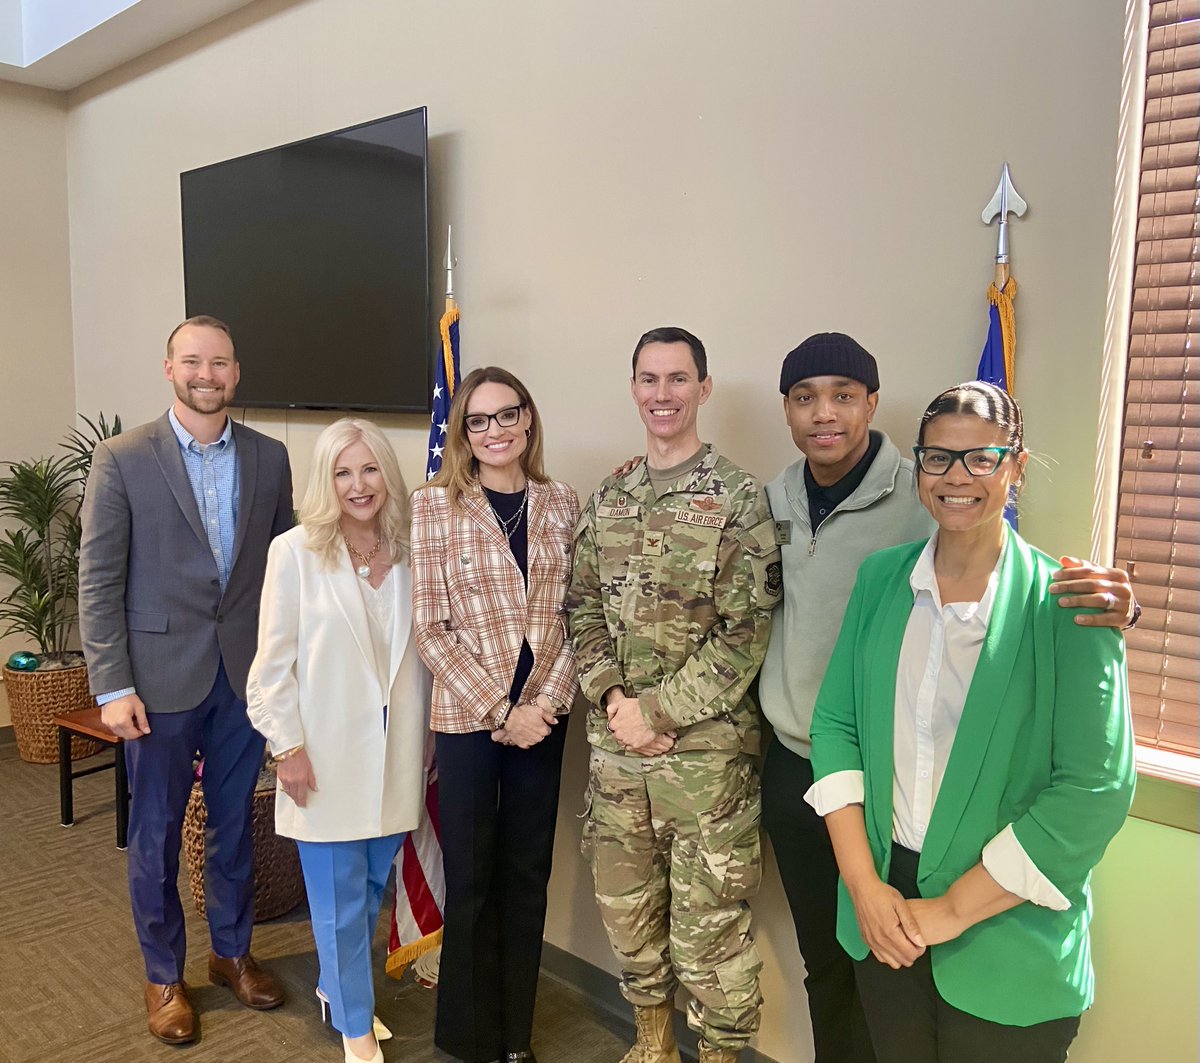 The Wichita Chamber hosted Military Affairs Directors from across the state for a tour of McConnell Air Force Base to discuss bolstering community support for our Kansas military installations.